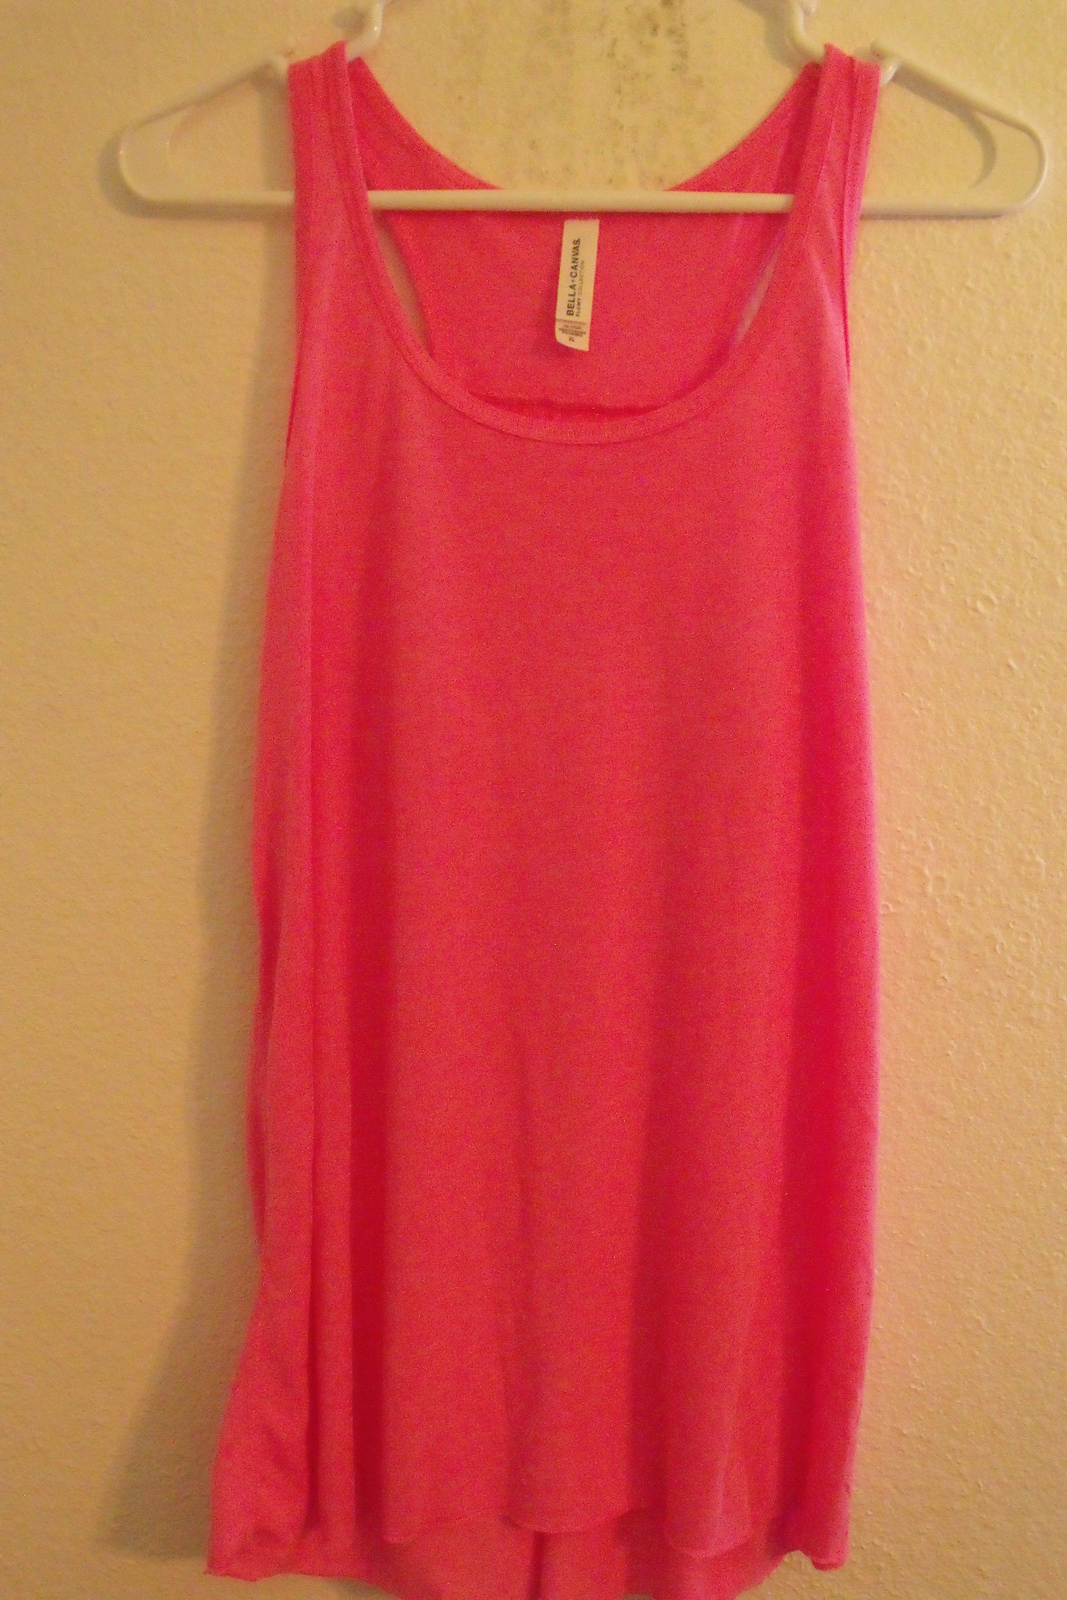 Womens Bella Canvas New Pink Flowing Racer Back Tank Top Size XS S M L XL